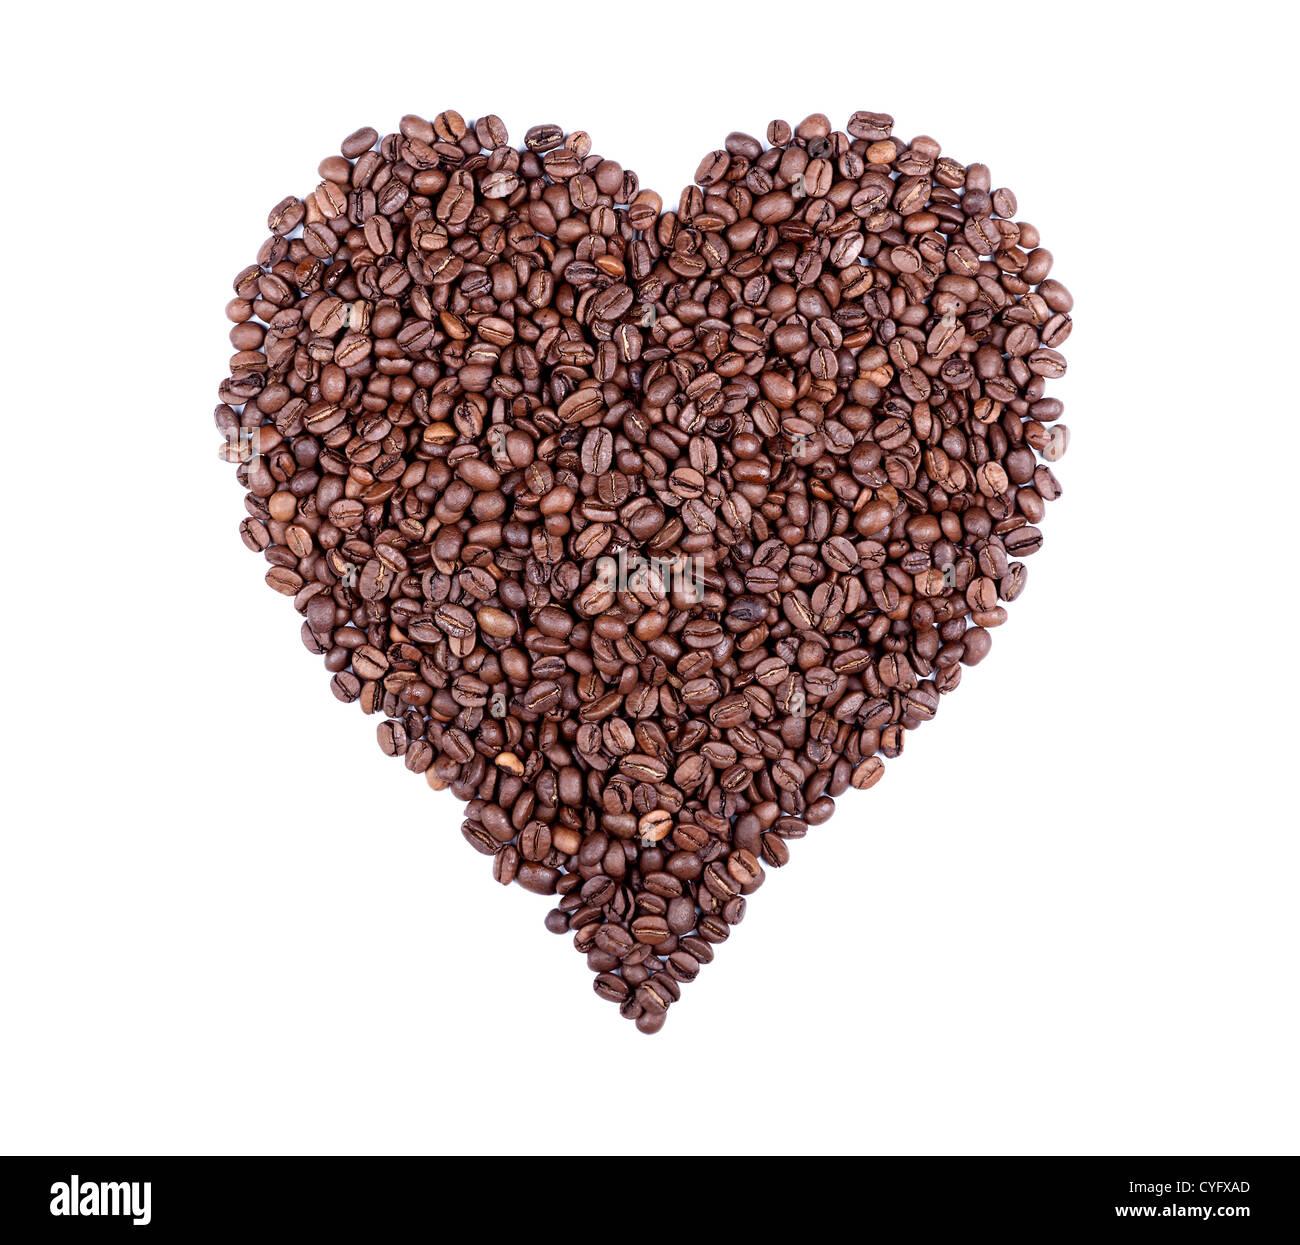 Heart symbol composed of roasted coffee beans. Ideal for REAL coffee lovers Stock Photo